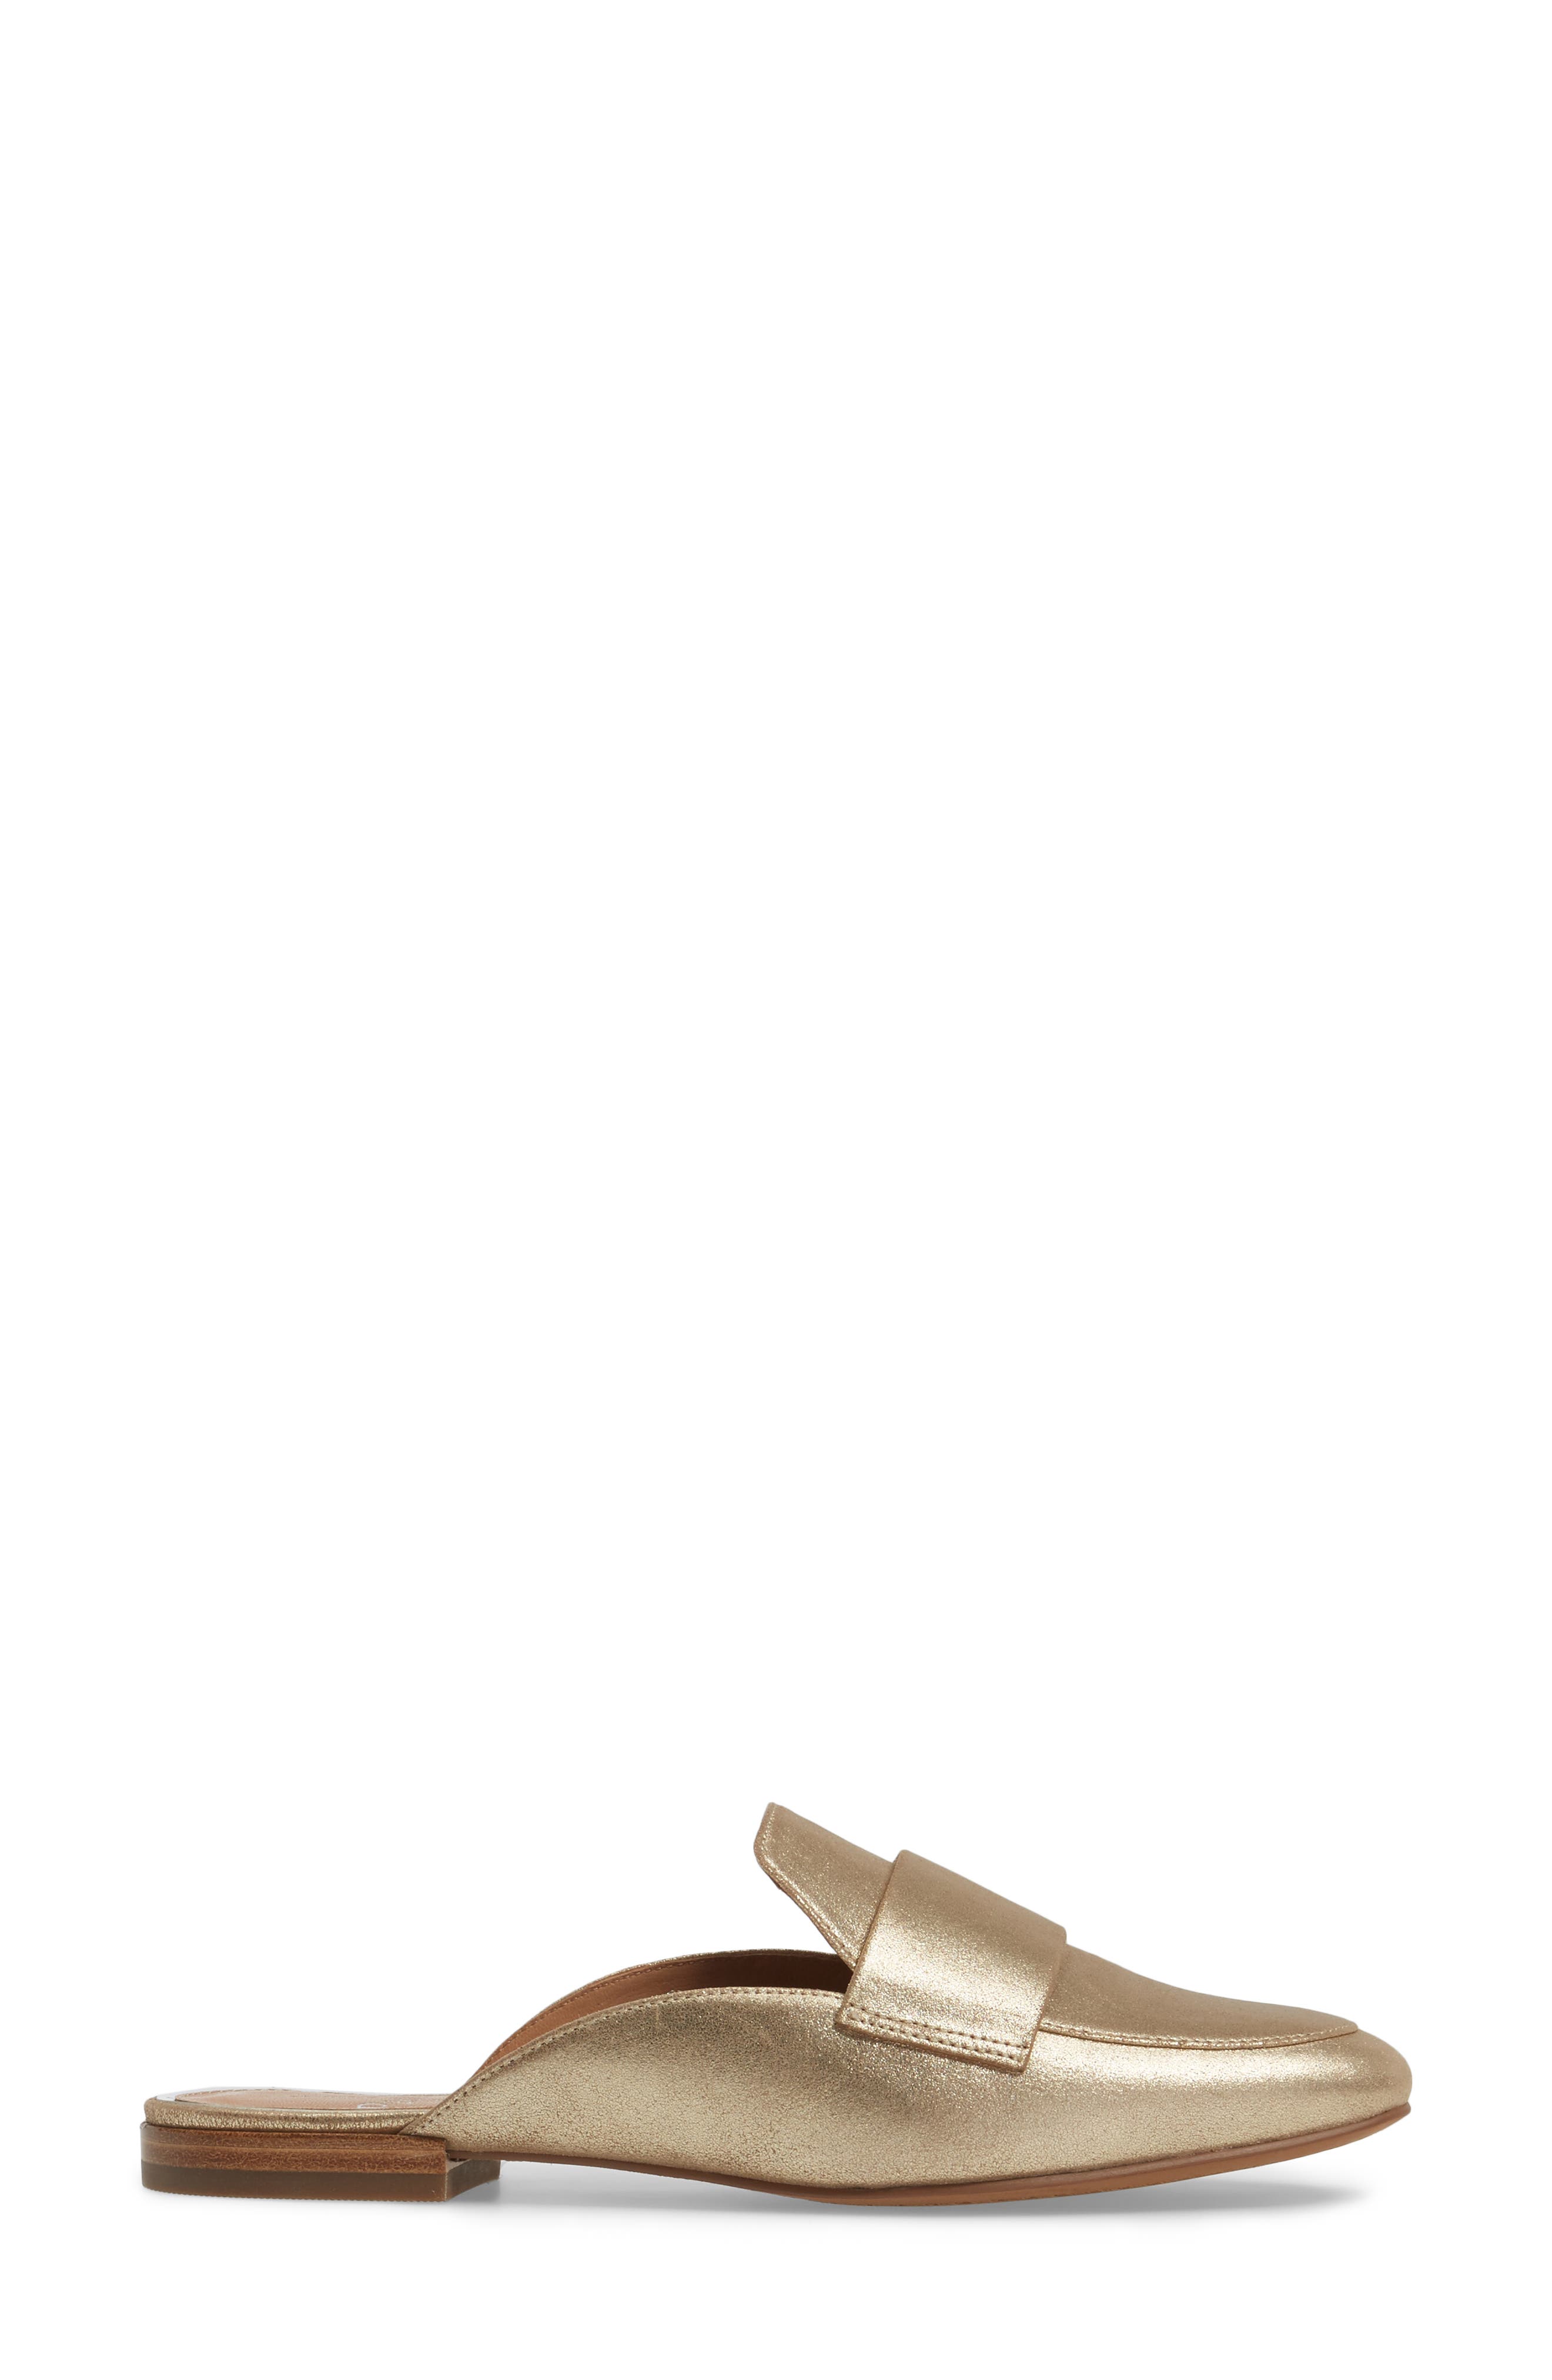 linea paolo annie loafer mule